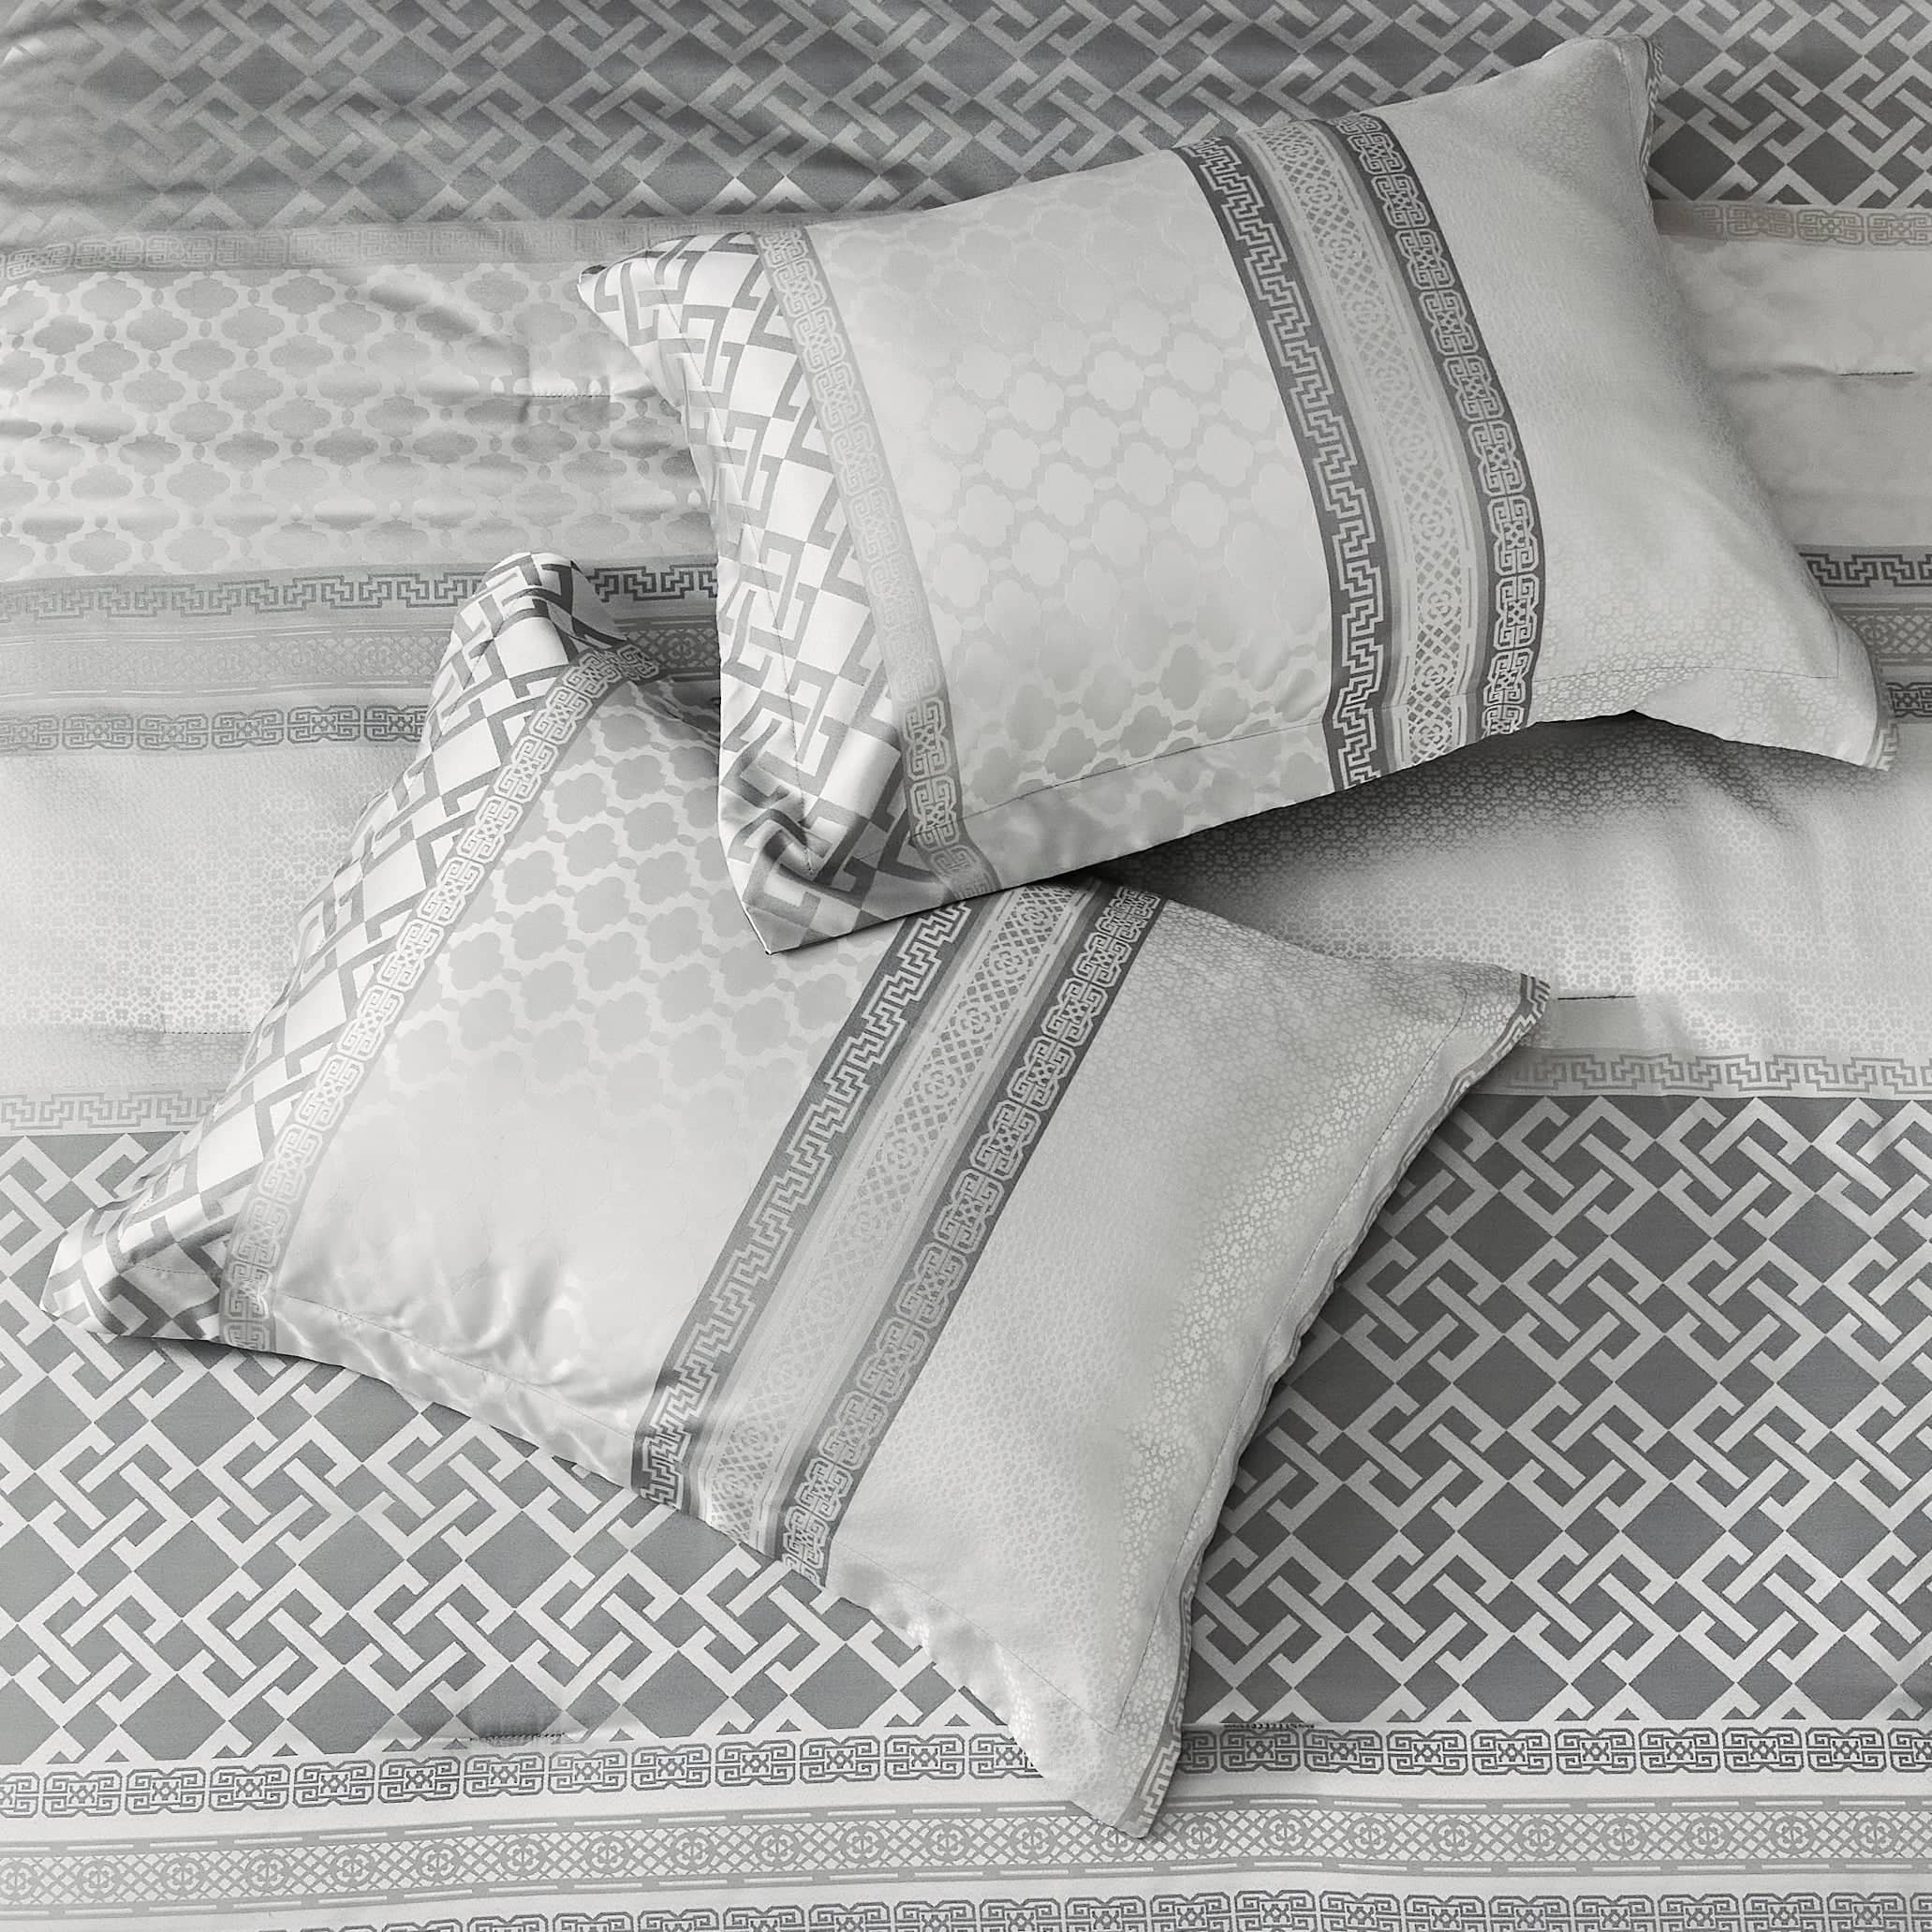 Hotel Style Comforter Set- 8 Pieces